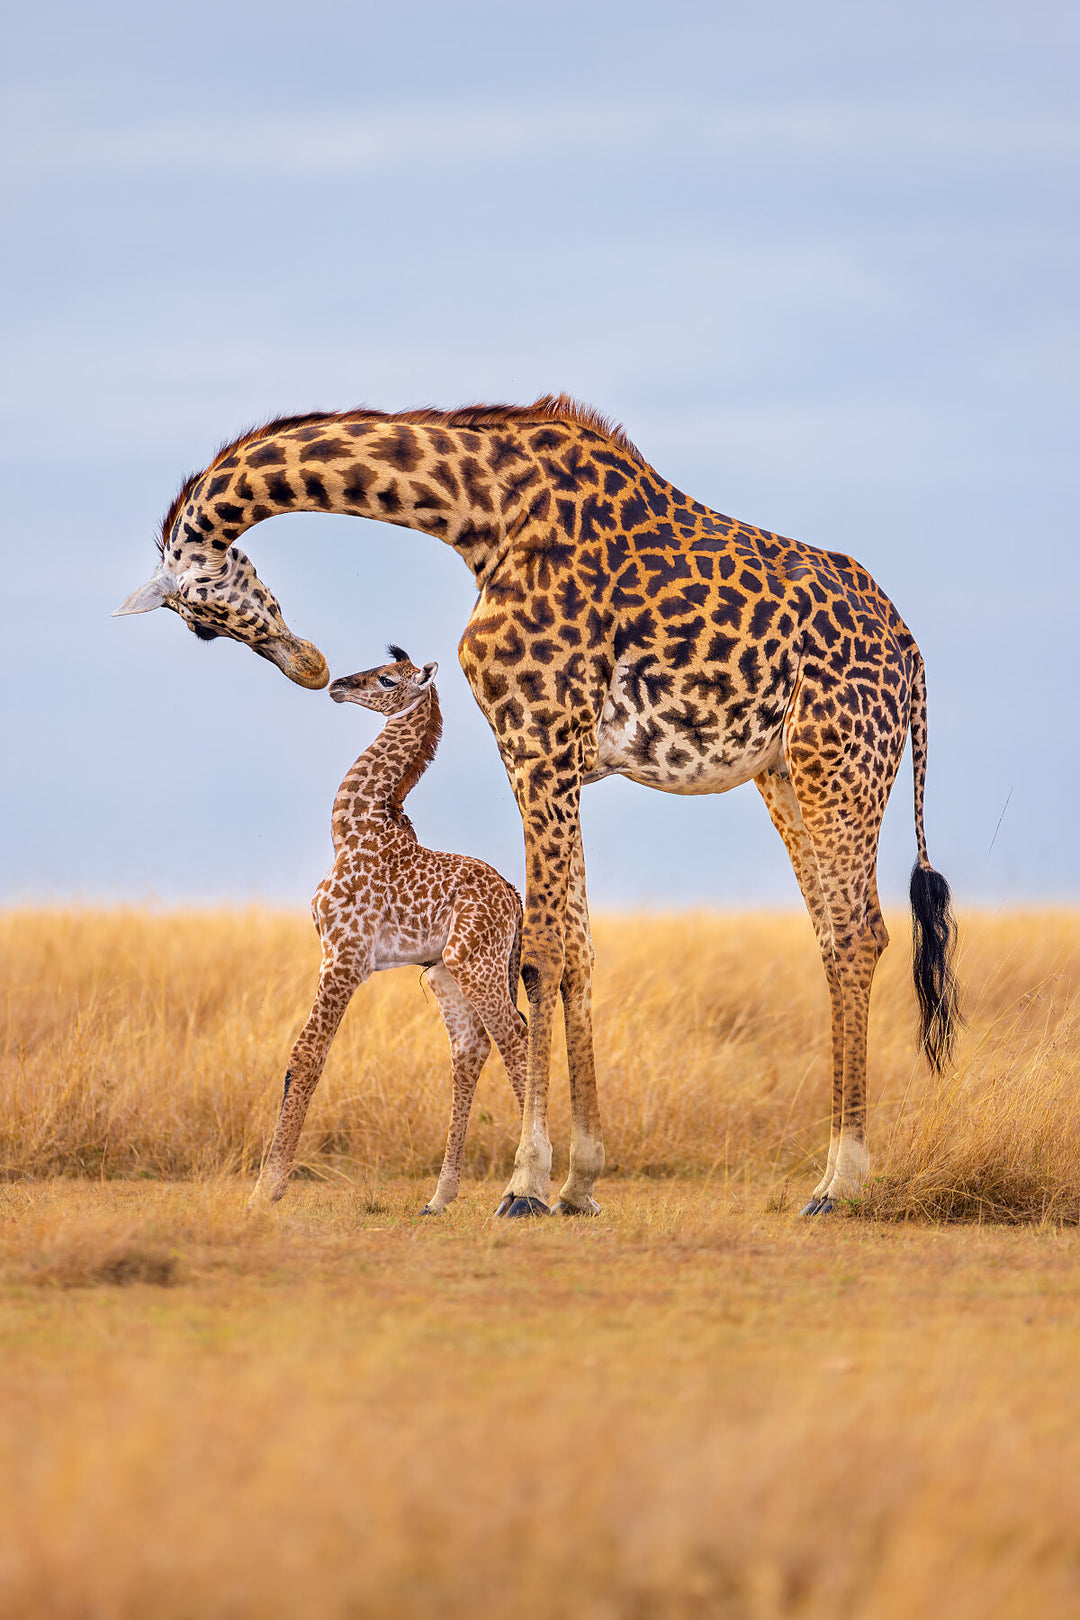 In the African wilderness, a framed fine art photograph captures a mother giraffe and her newborn sharing a tender moment, embodying universal love and the unbreakable bond between species. By Thomas Nicholson